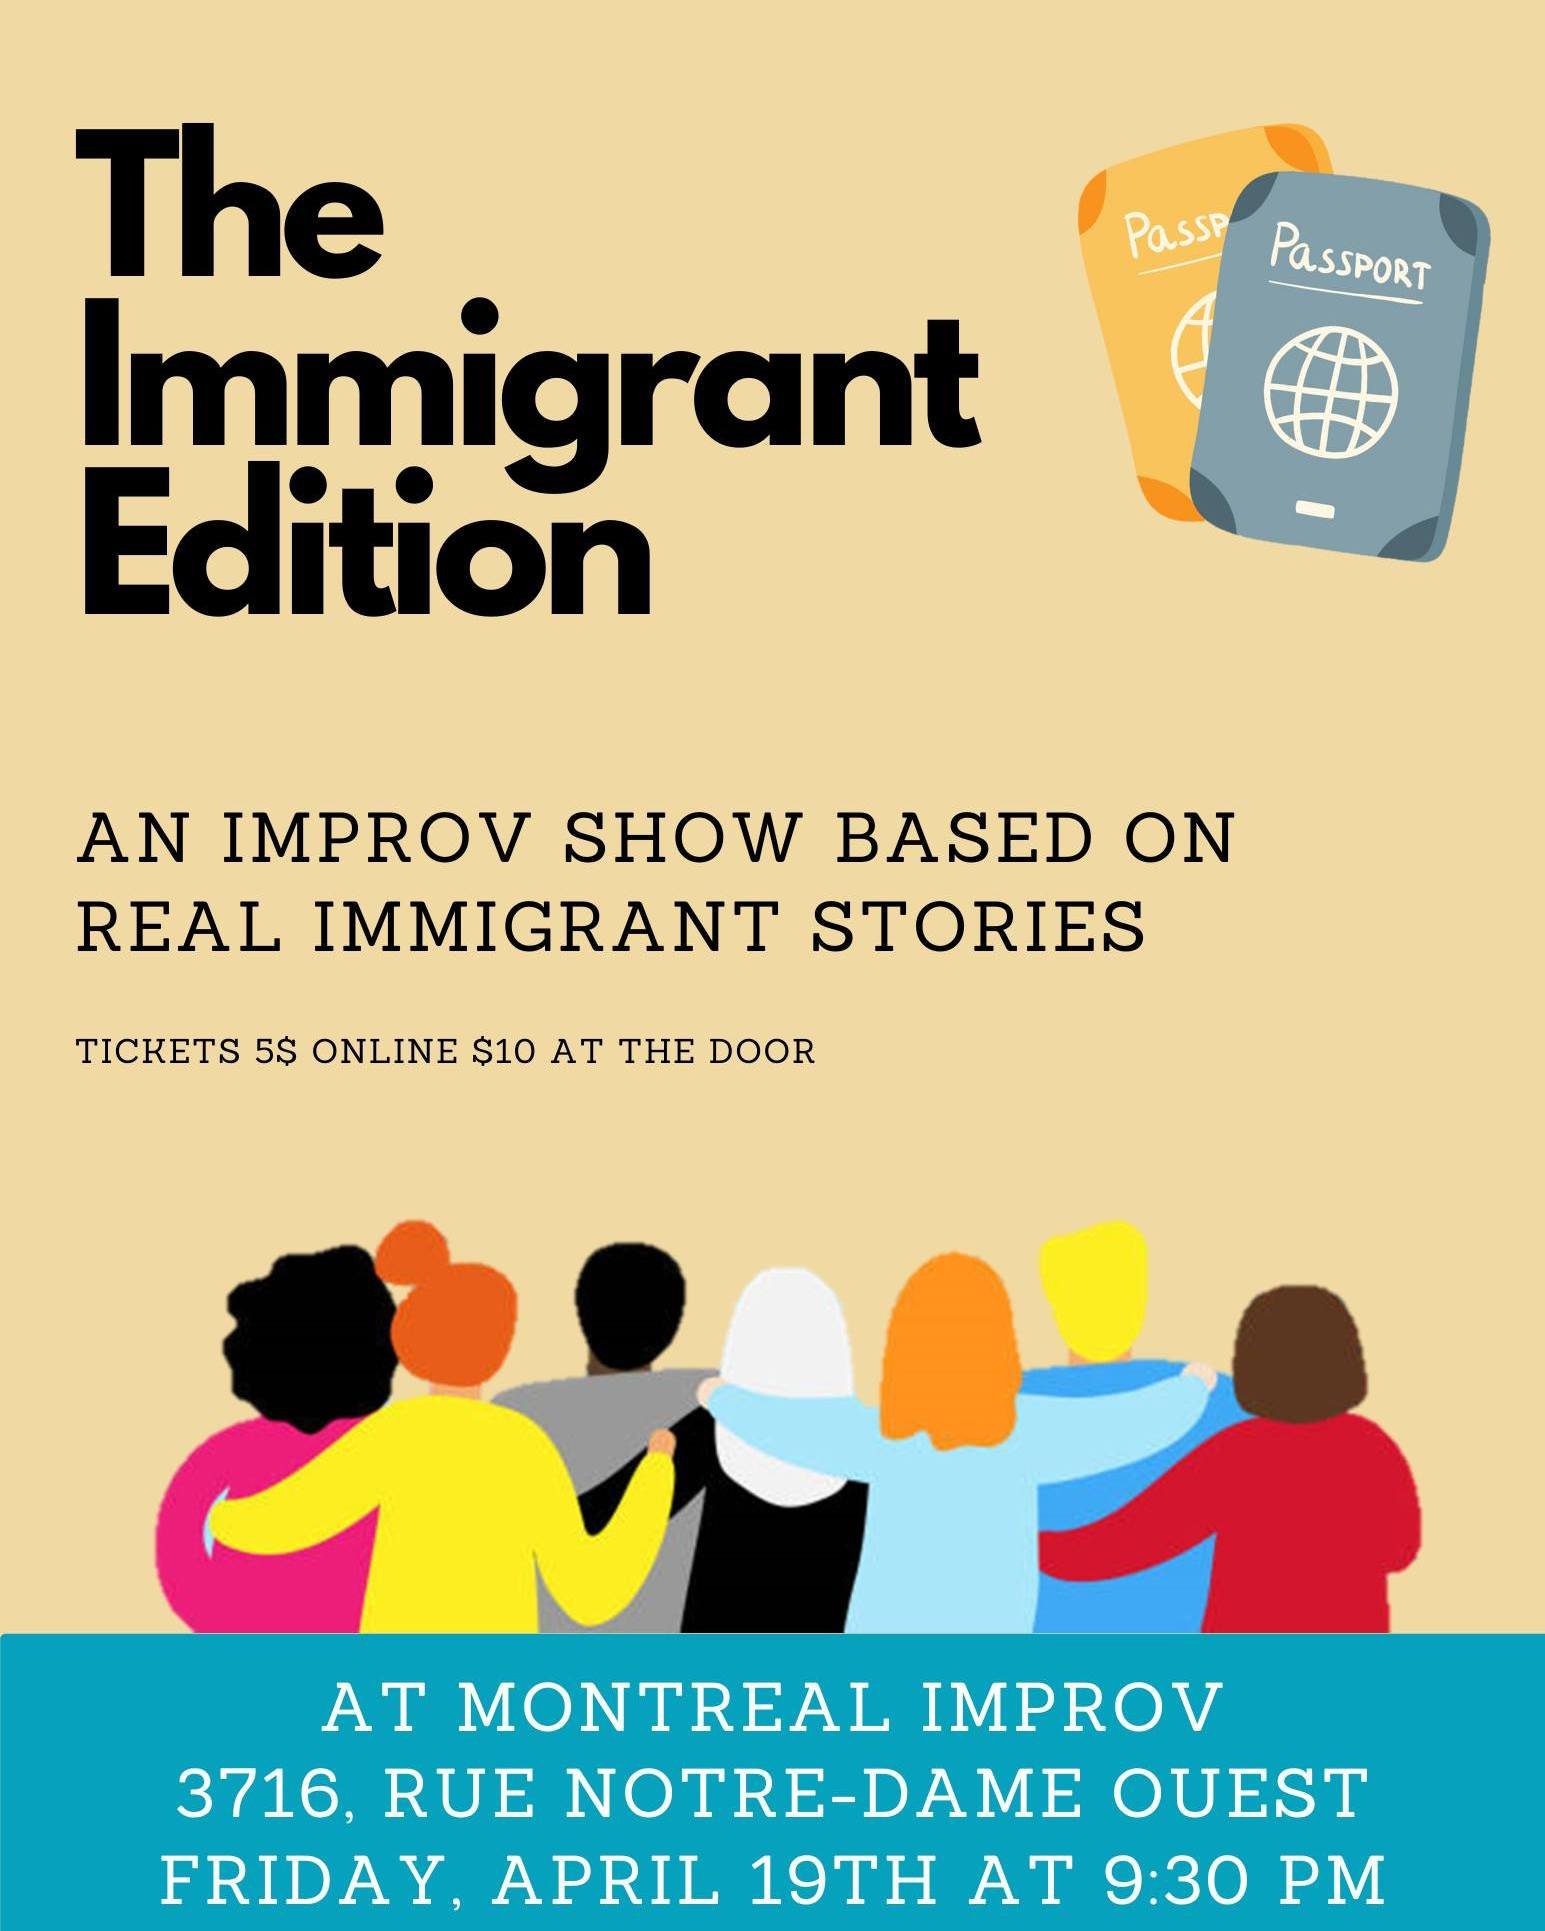 End your Friday night with us for the Immigrant Edition at 9:30pm, on April 19th!

Immigrant is a word with different connotations throughout history. You may be an immigrant, be the child of immigrants or simply know an immigrant. But what do they a